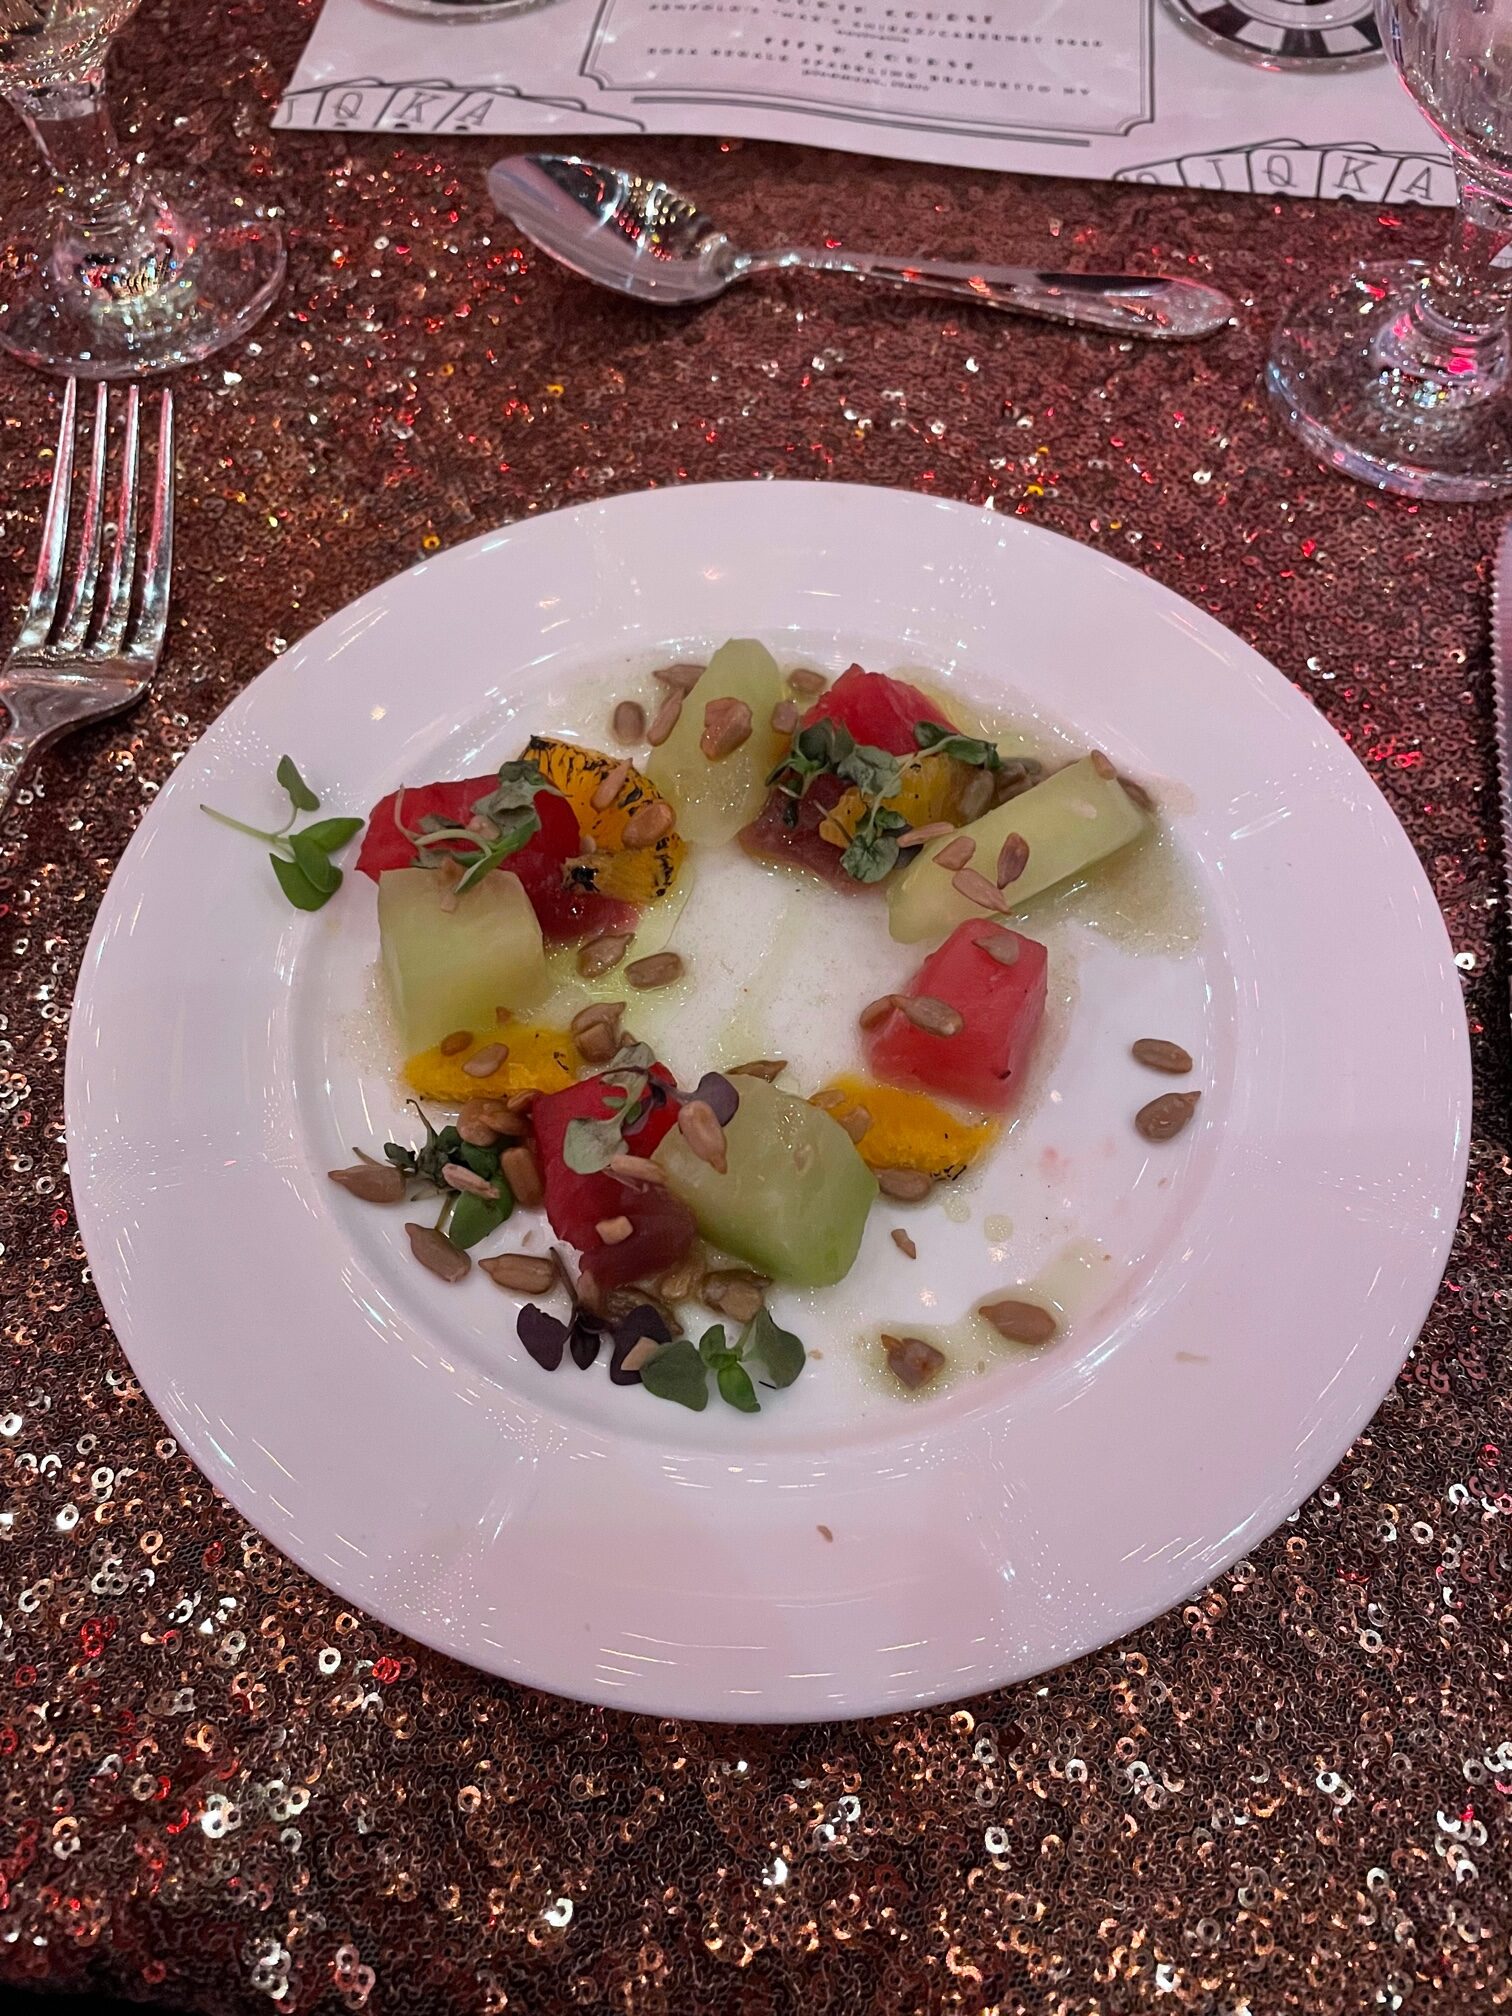 First course of the grand gala dinner.